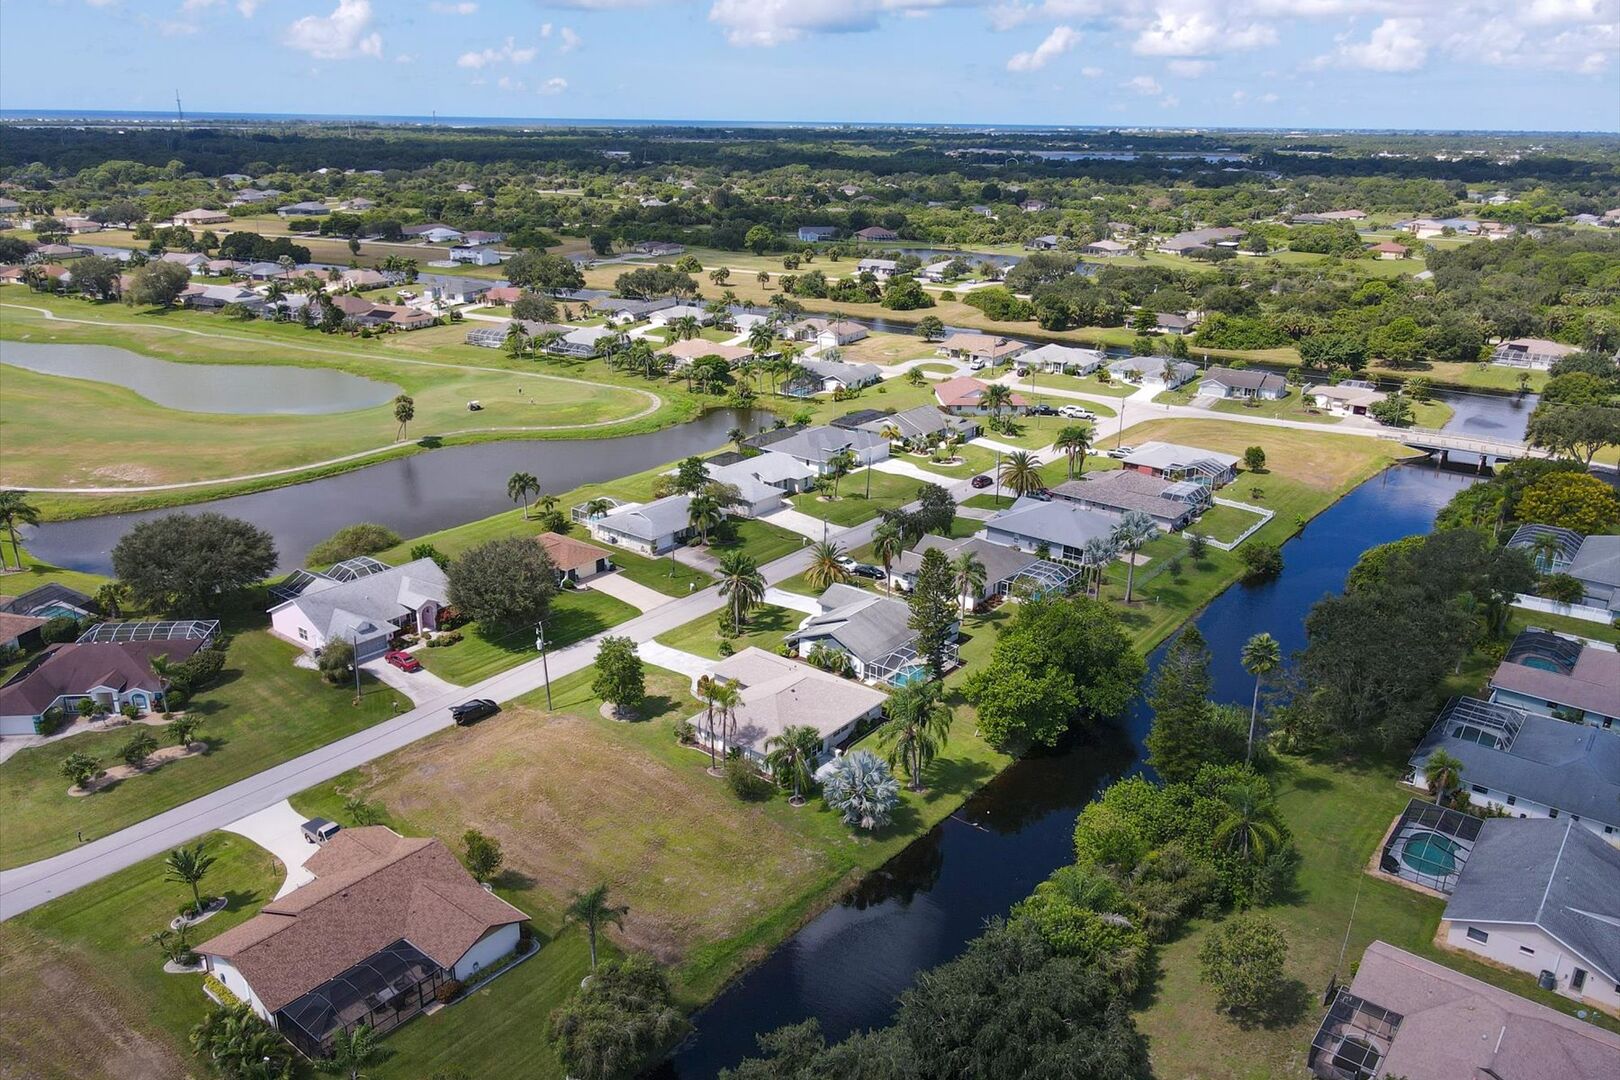 Aerial view of house and canal